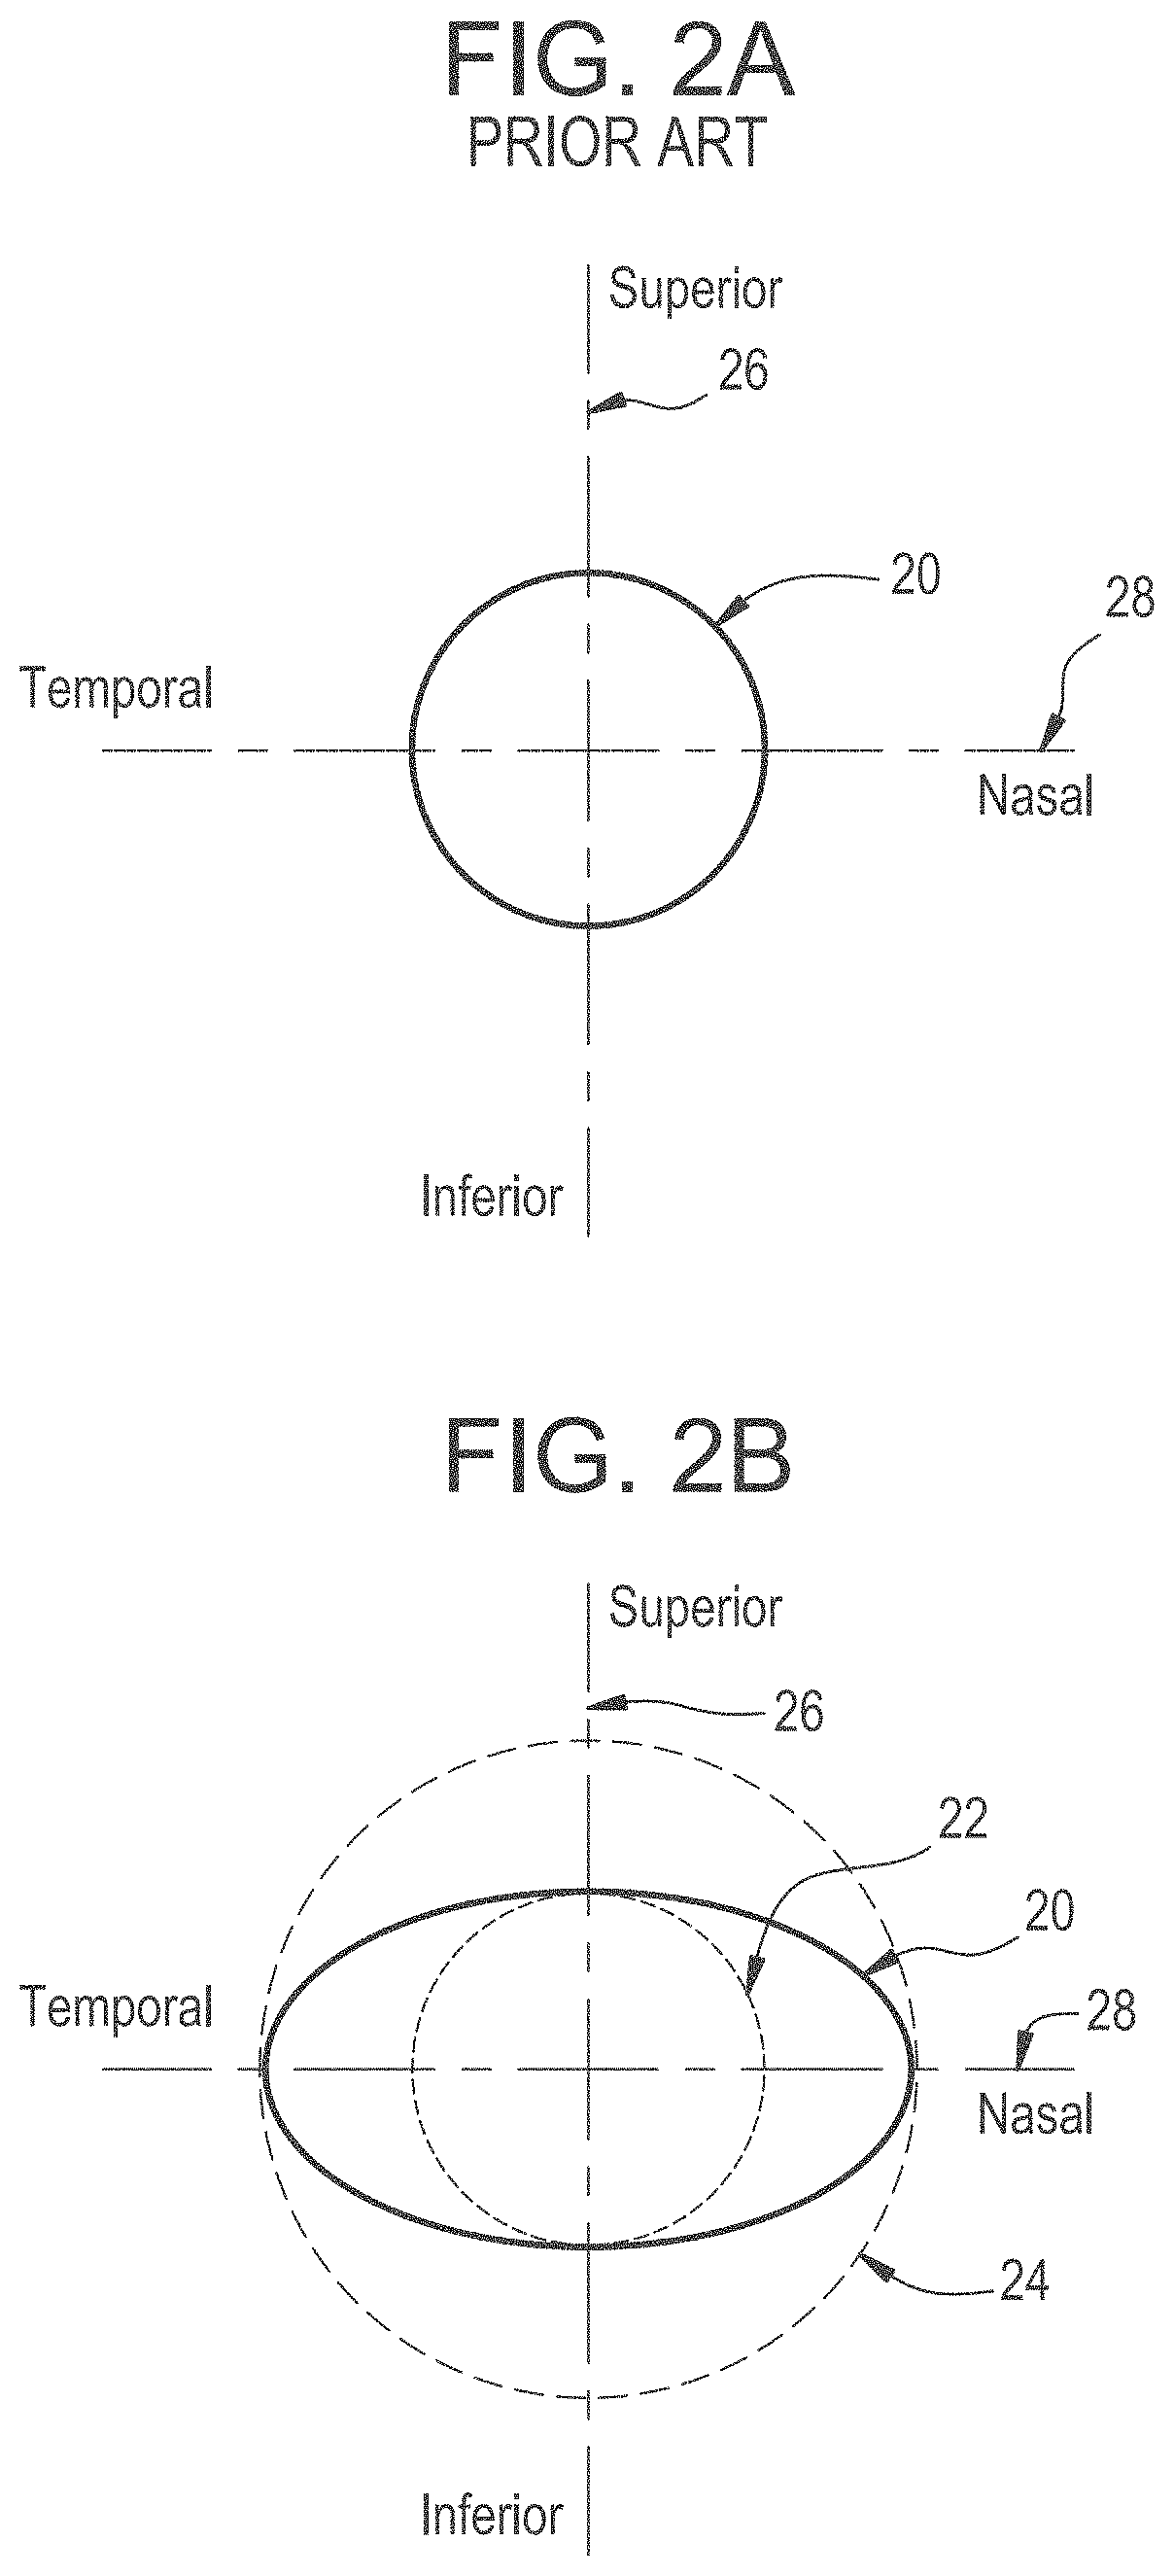 Rotationally stabilized contact lens with improved comfort and improved stabilization utilizing optimized stiffness profiles